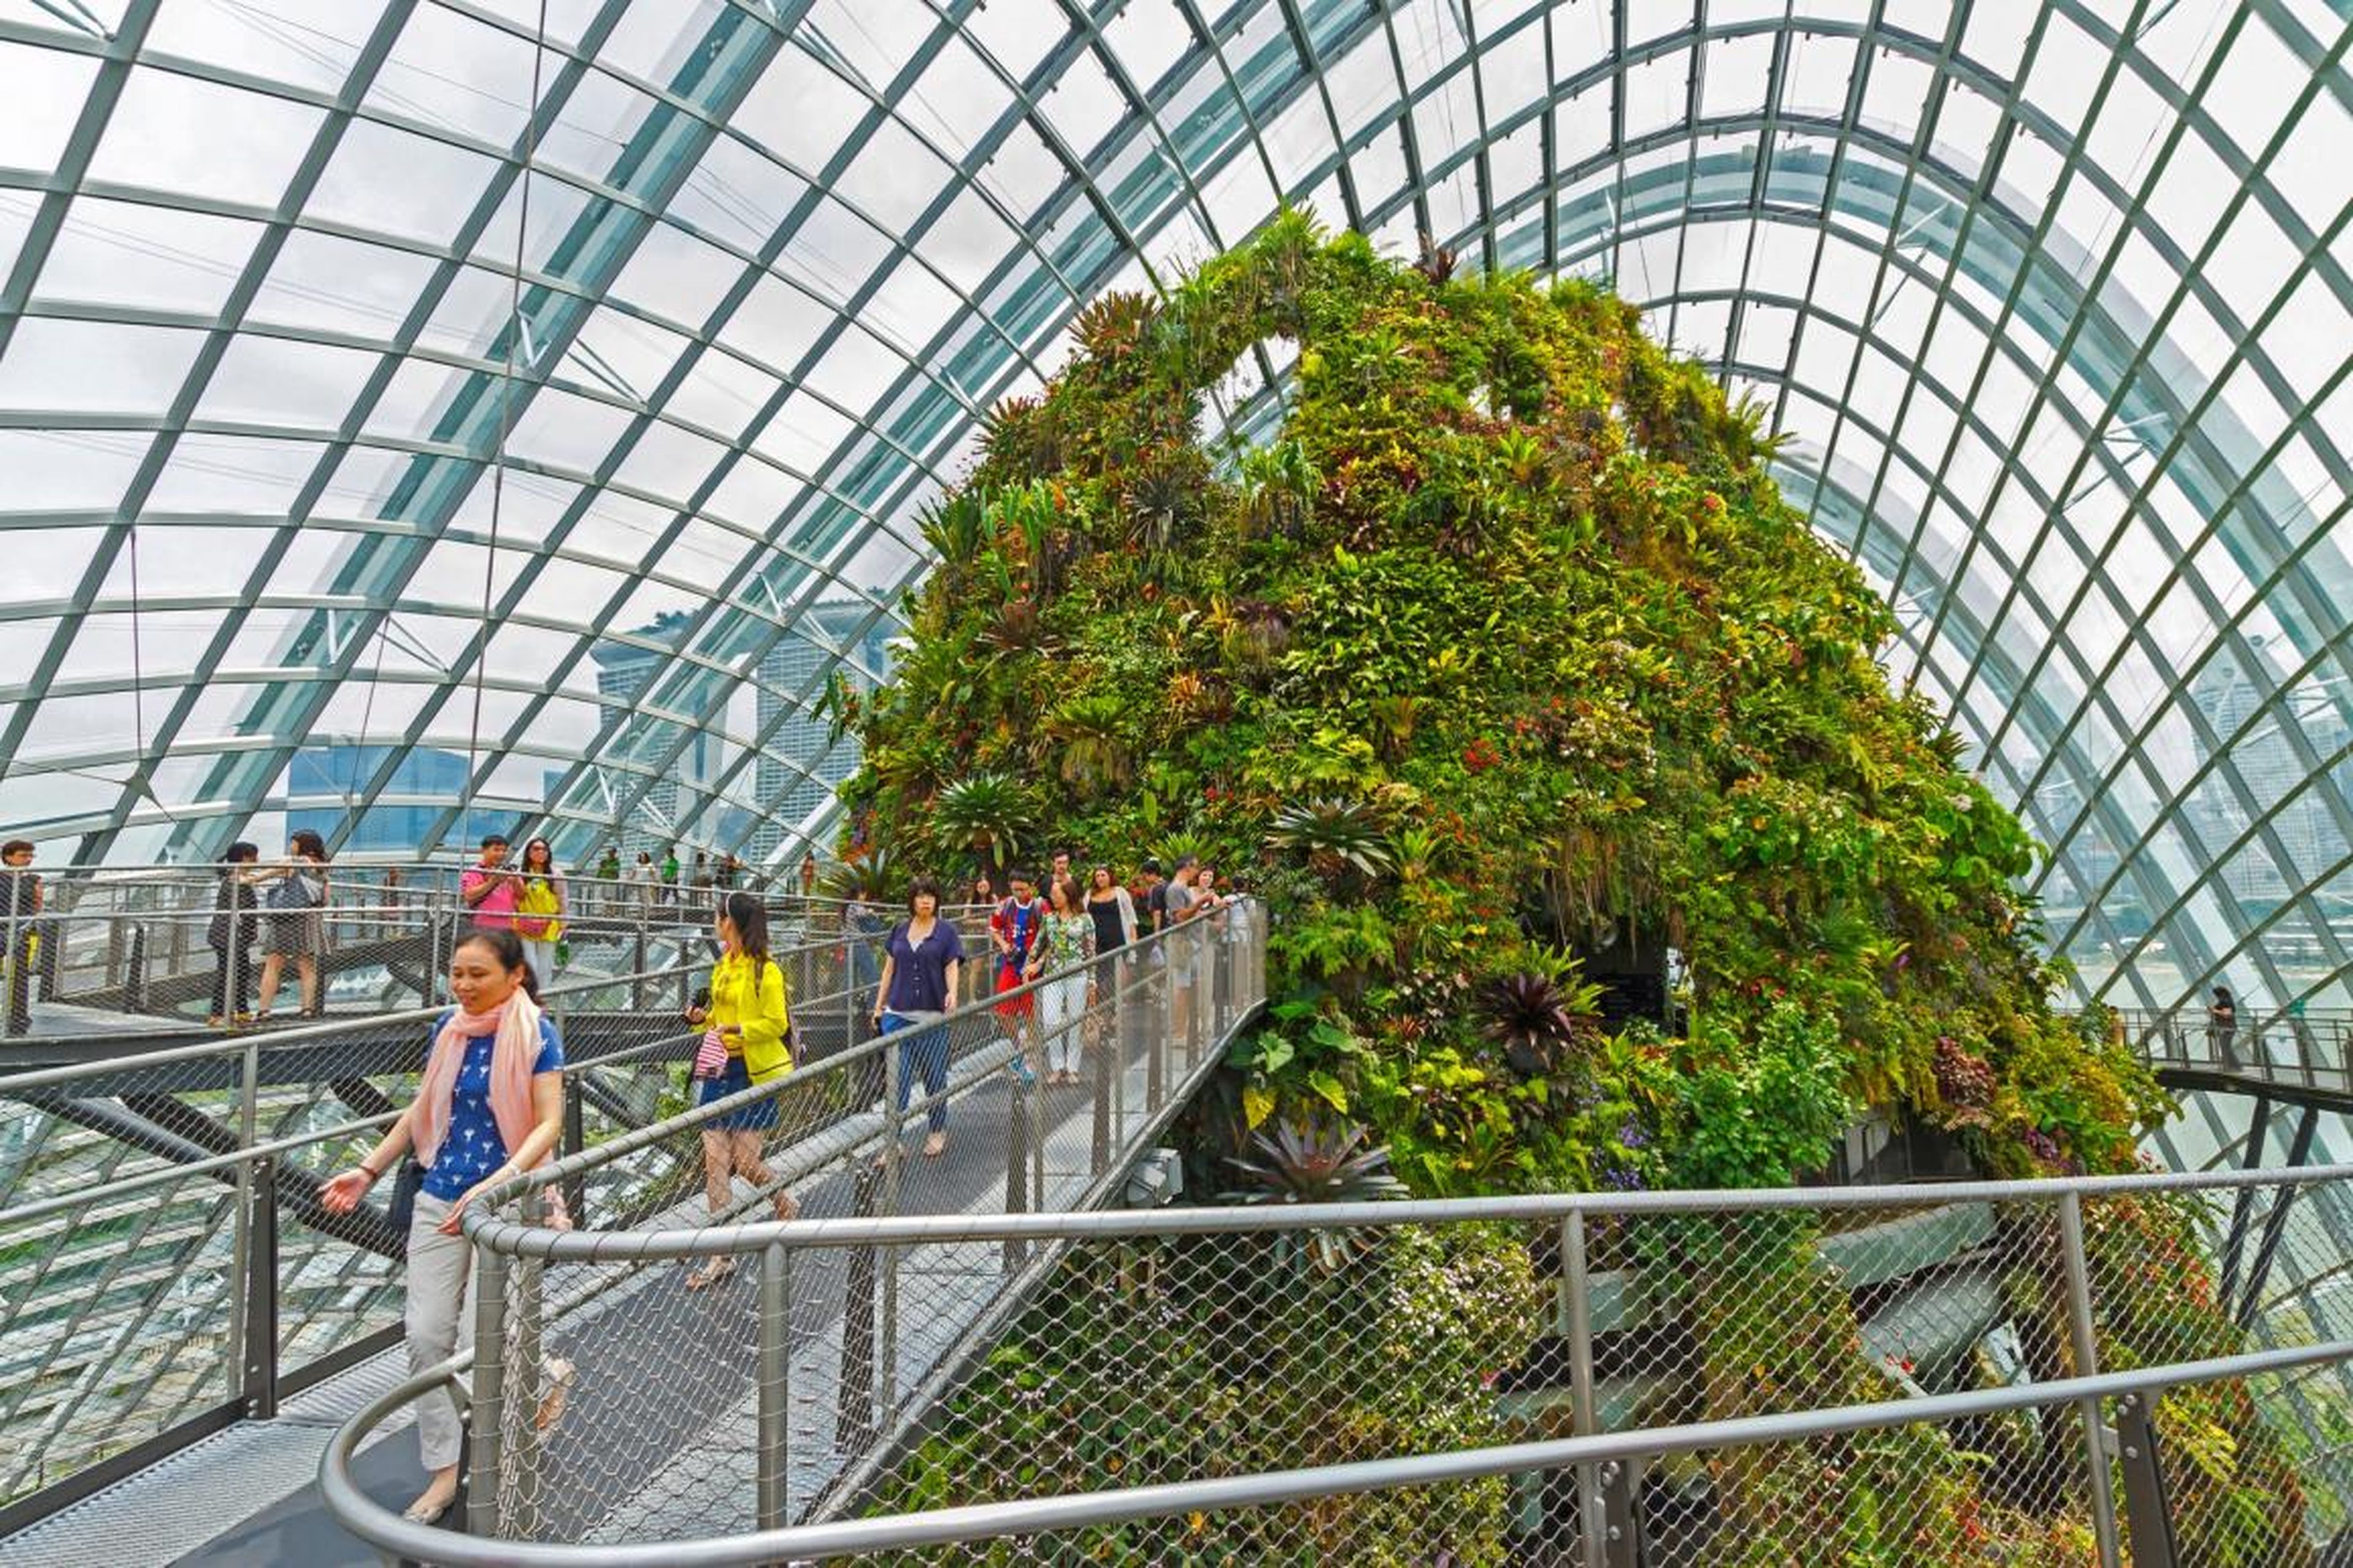 Cloud Forest has an indoor mountain that is flushed with life ...